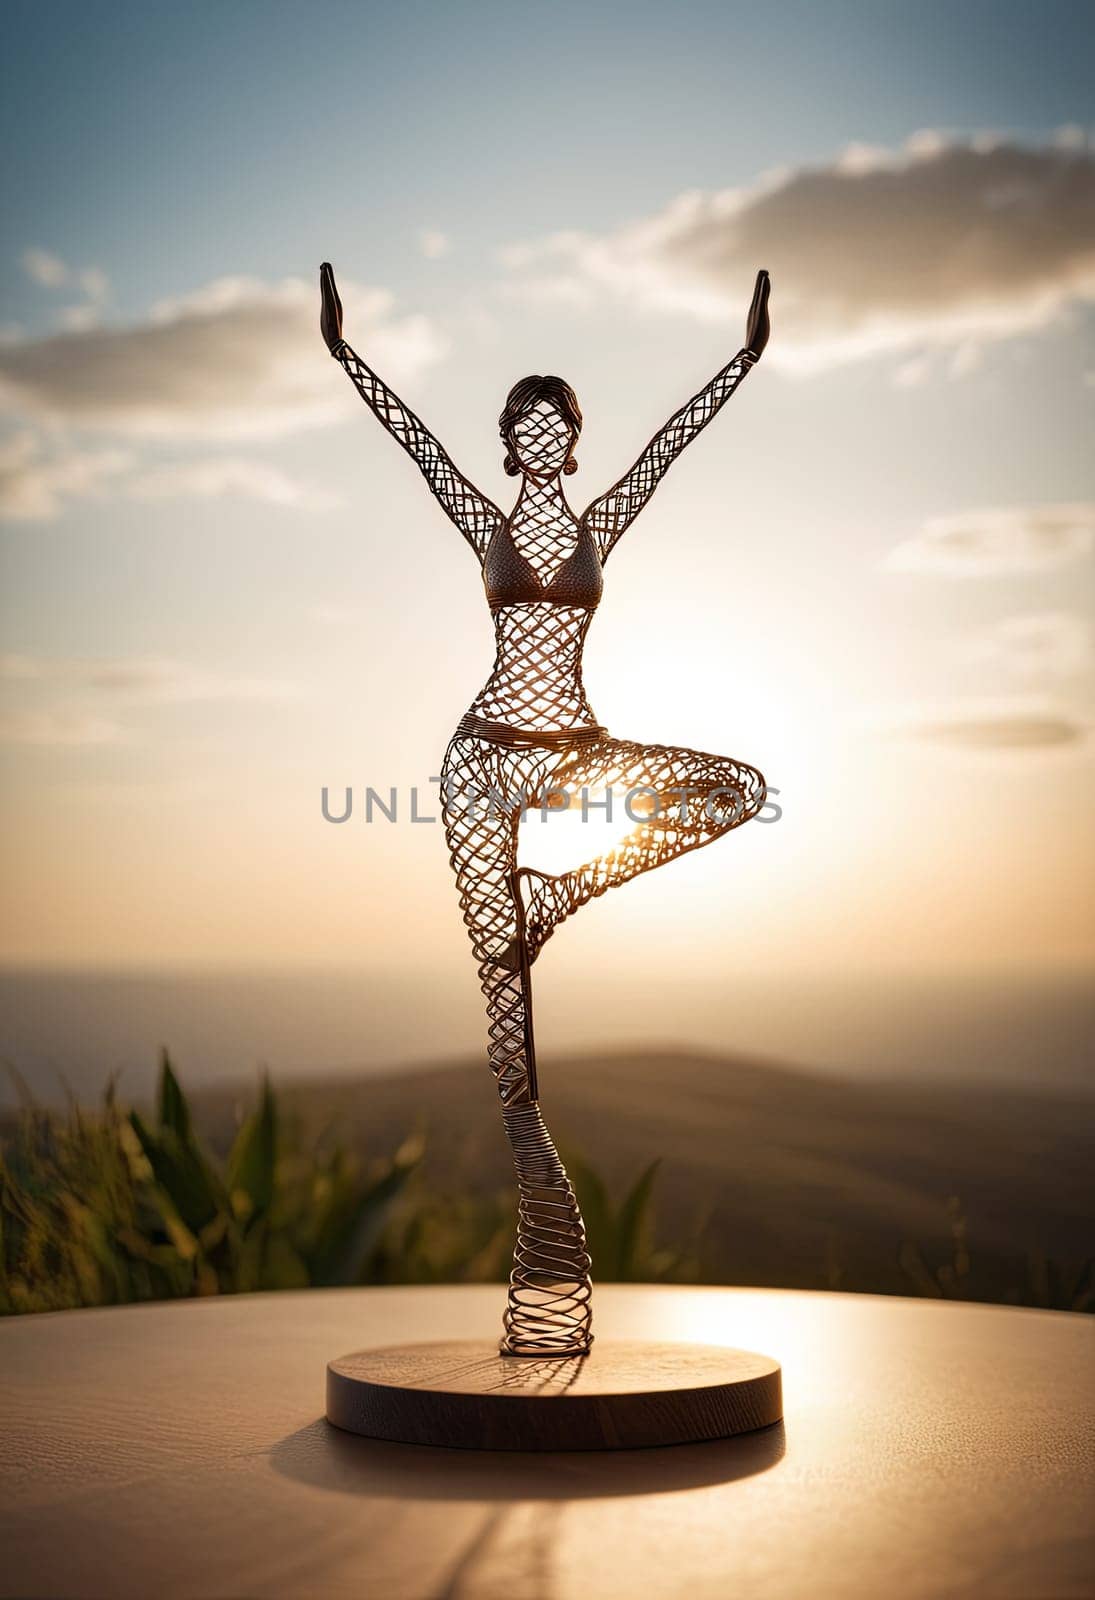 Woman in yoga pose, bent wire figure on nature backdrop, Creative figures symbol of yoga and harmony, art and serenity intersection. Female fitness yoga routine concept. Healthy lifestyle. by panophotograph